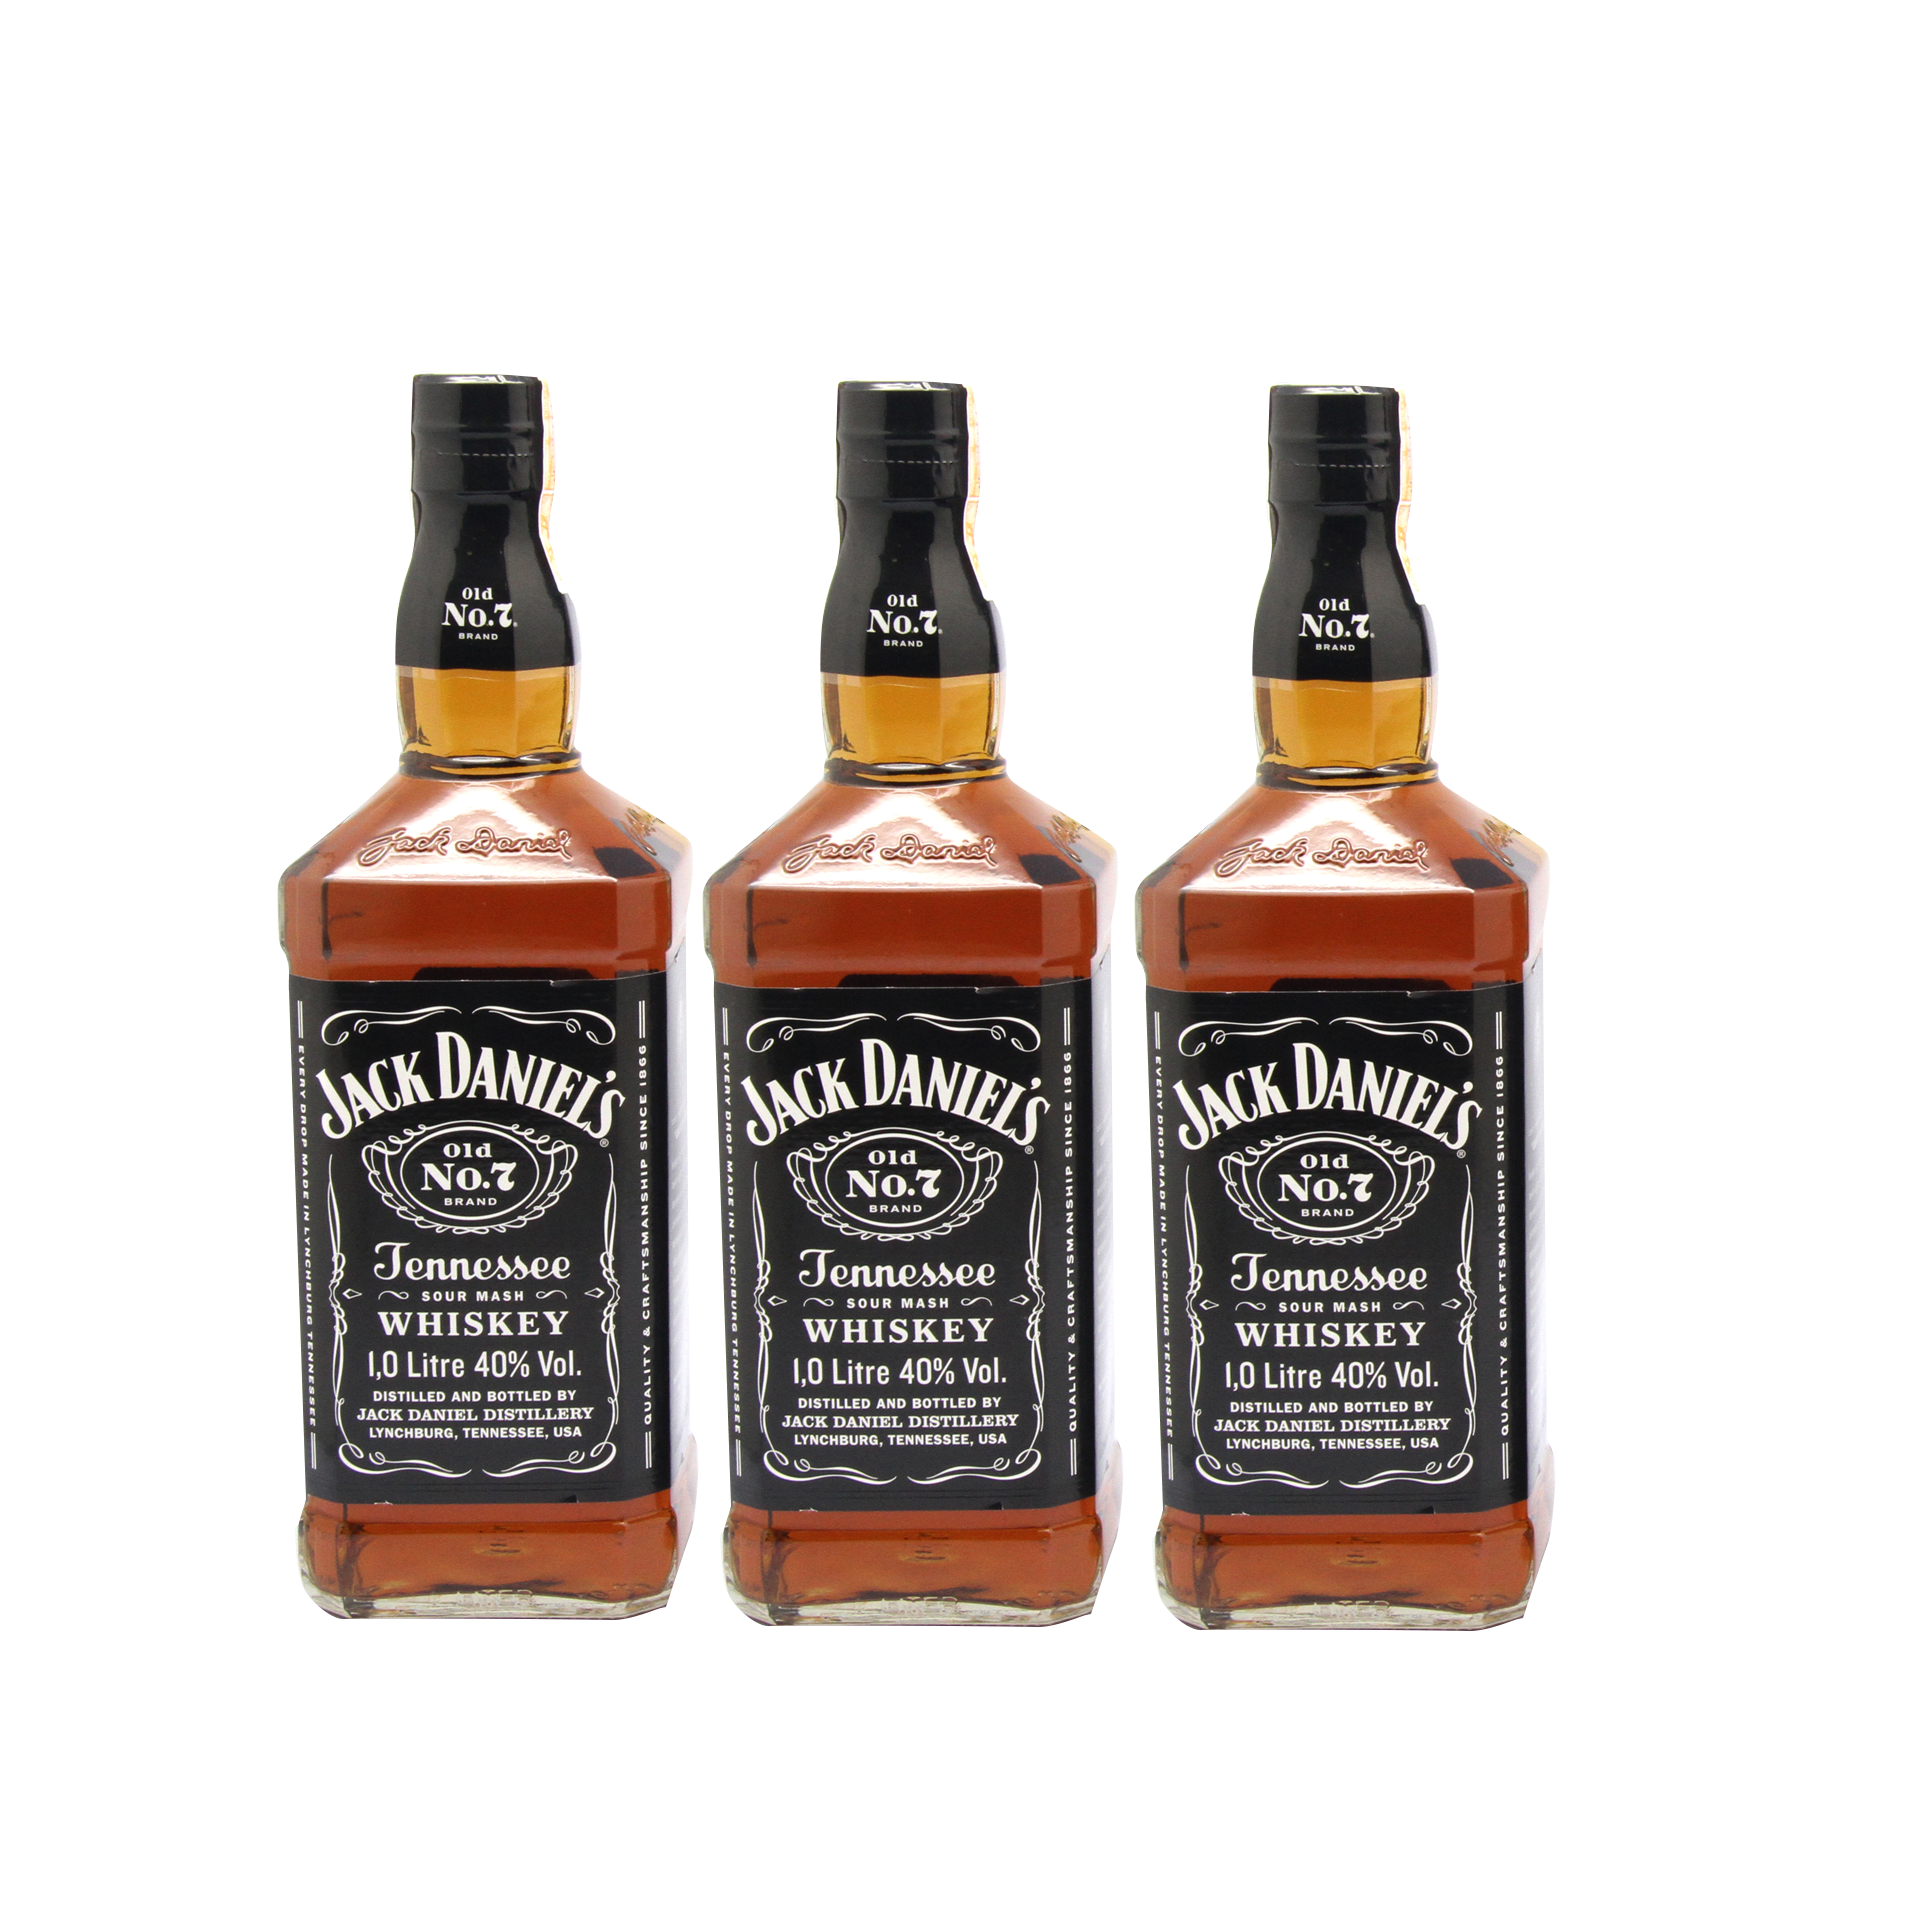 Jack Daniel's Old No. 7 Tennessee Sour Mash Whiskey Pack of 3